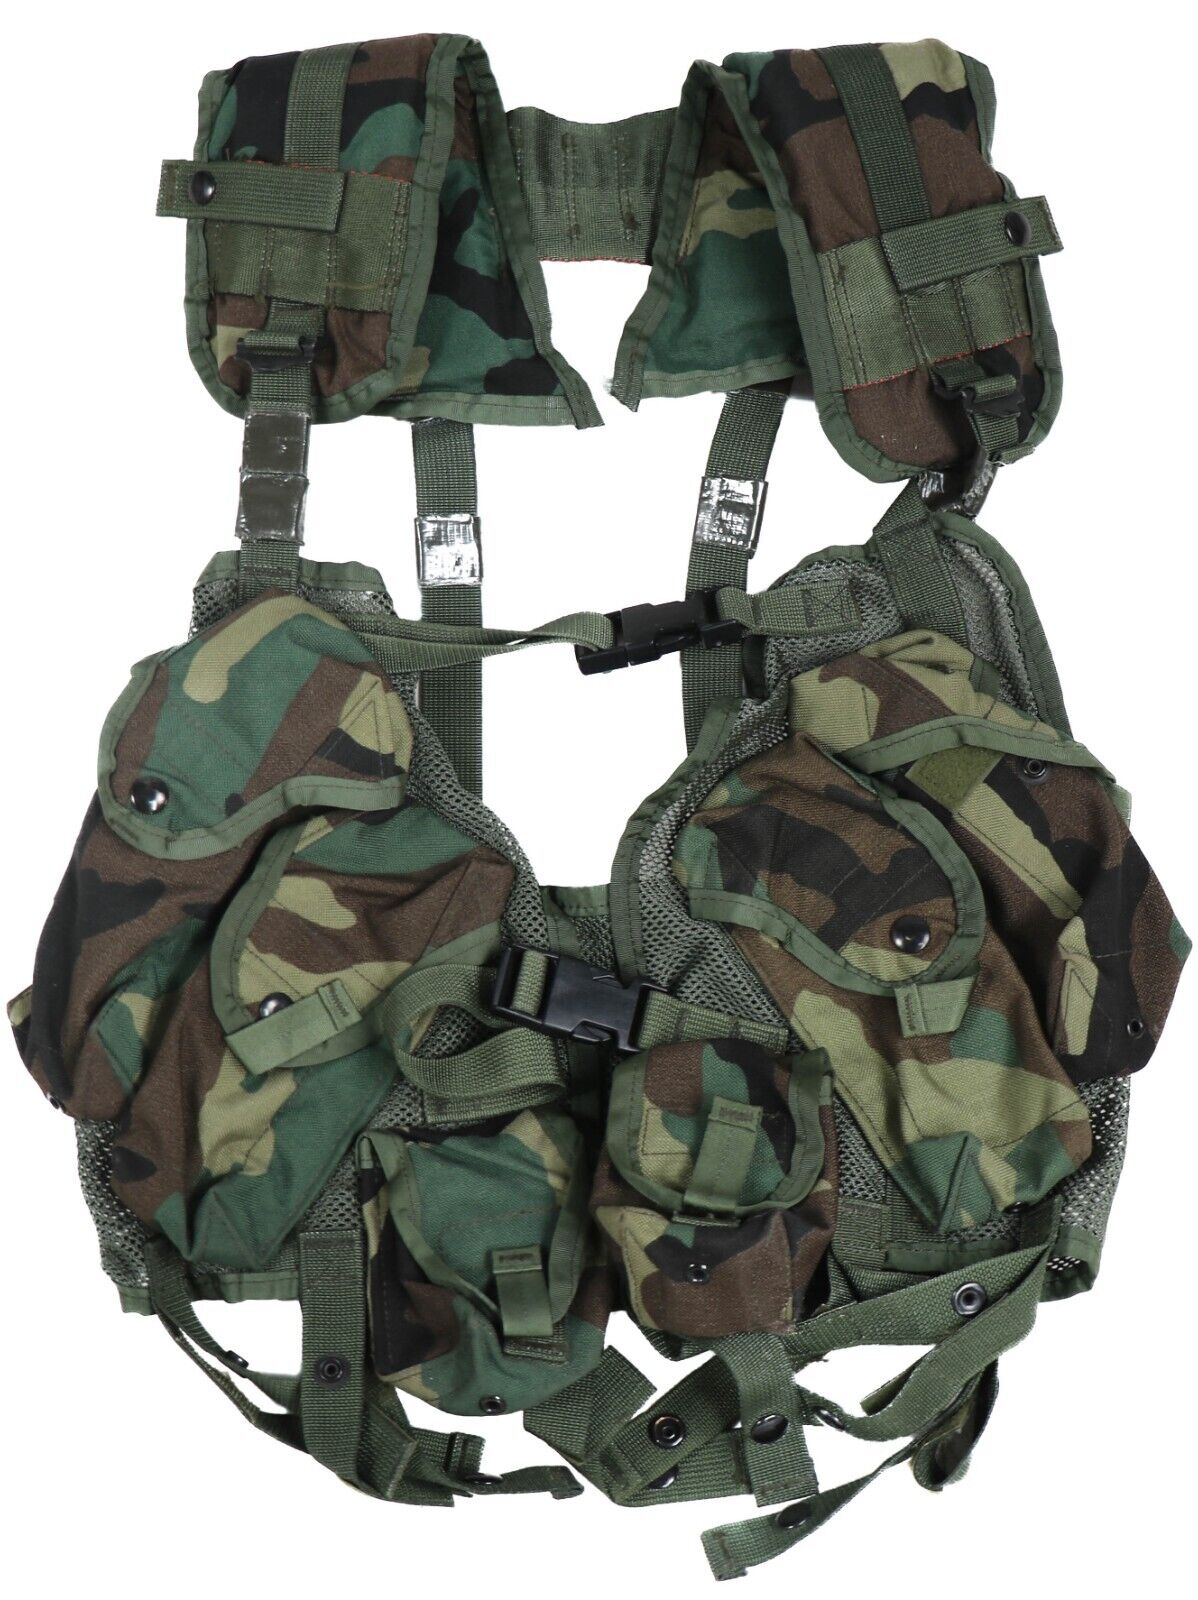 US Military Enhanced Tactical Load Bearing Vest w Pouches Woodland M81 BDU ALICE